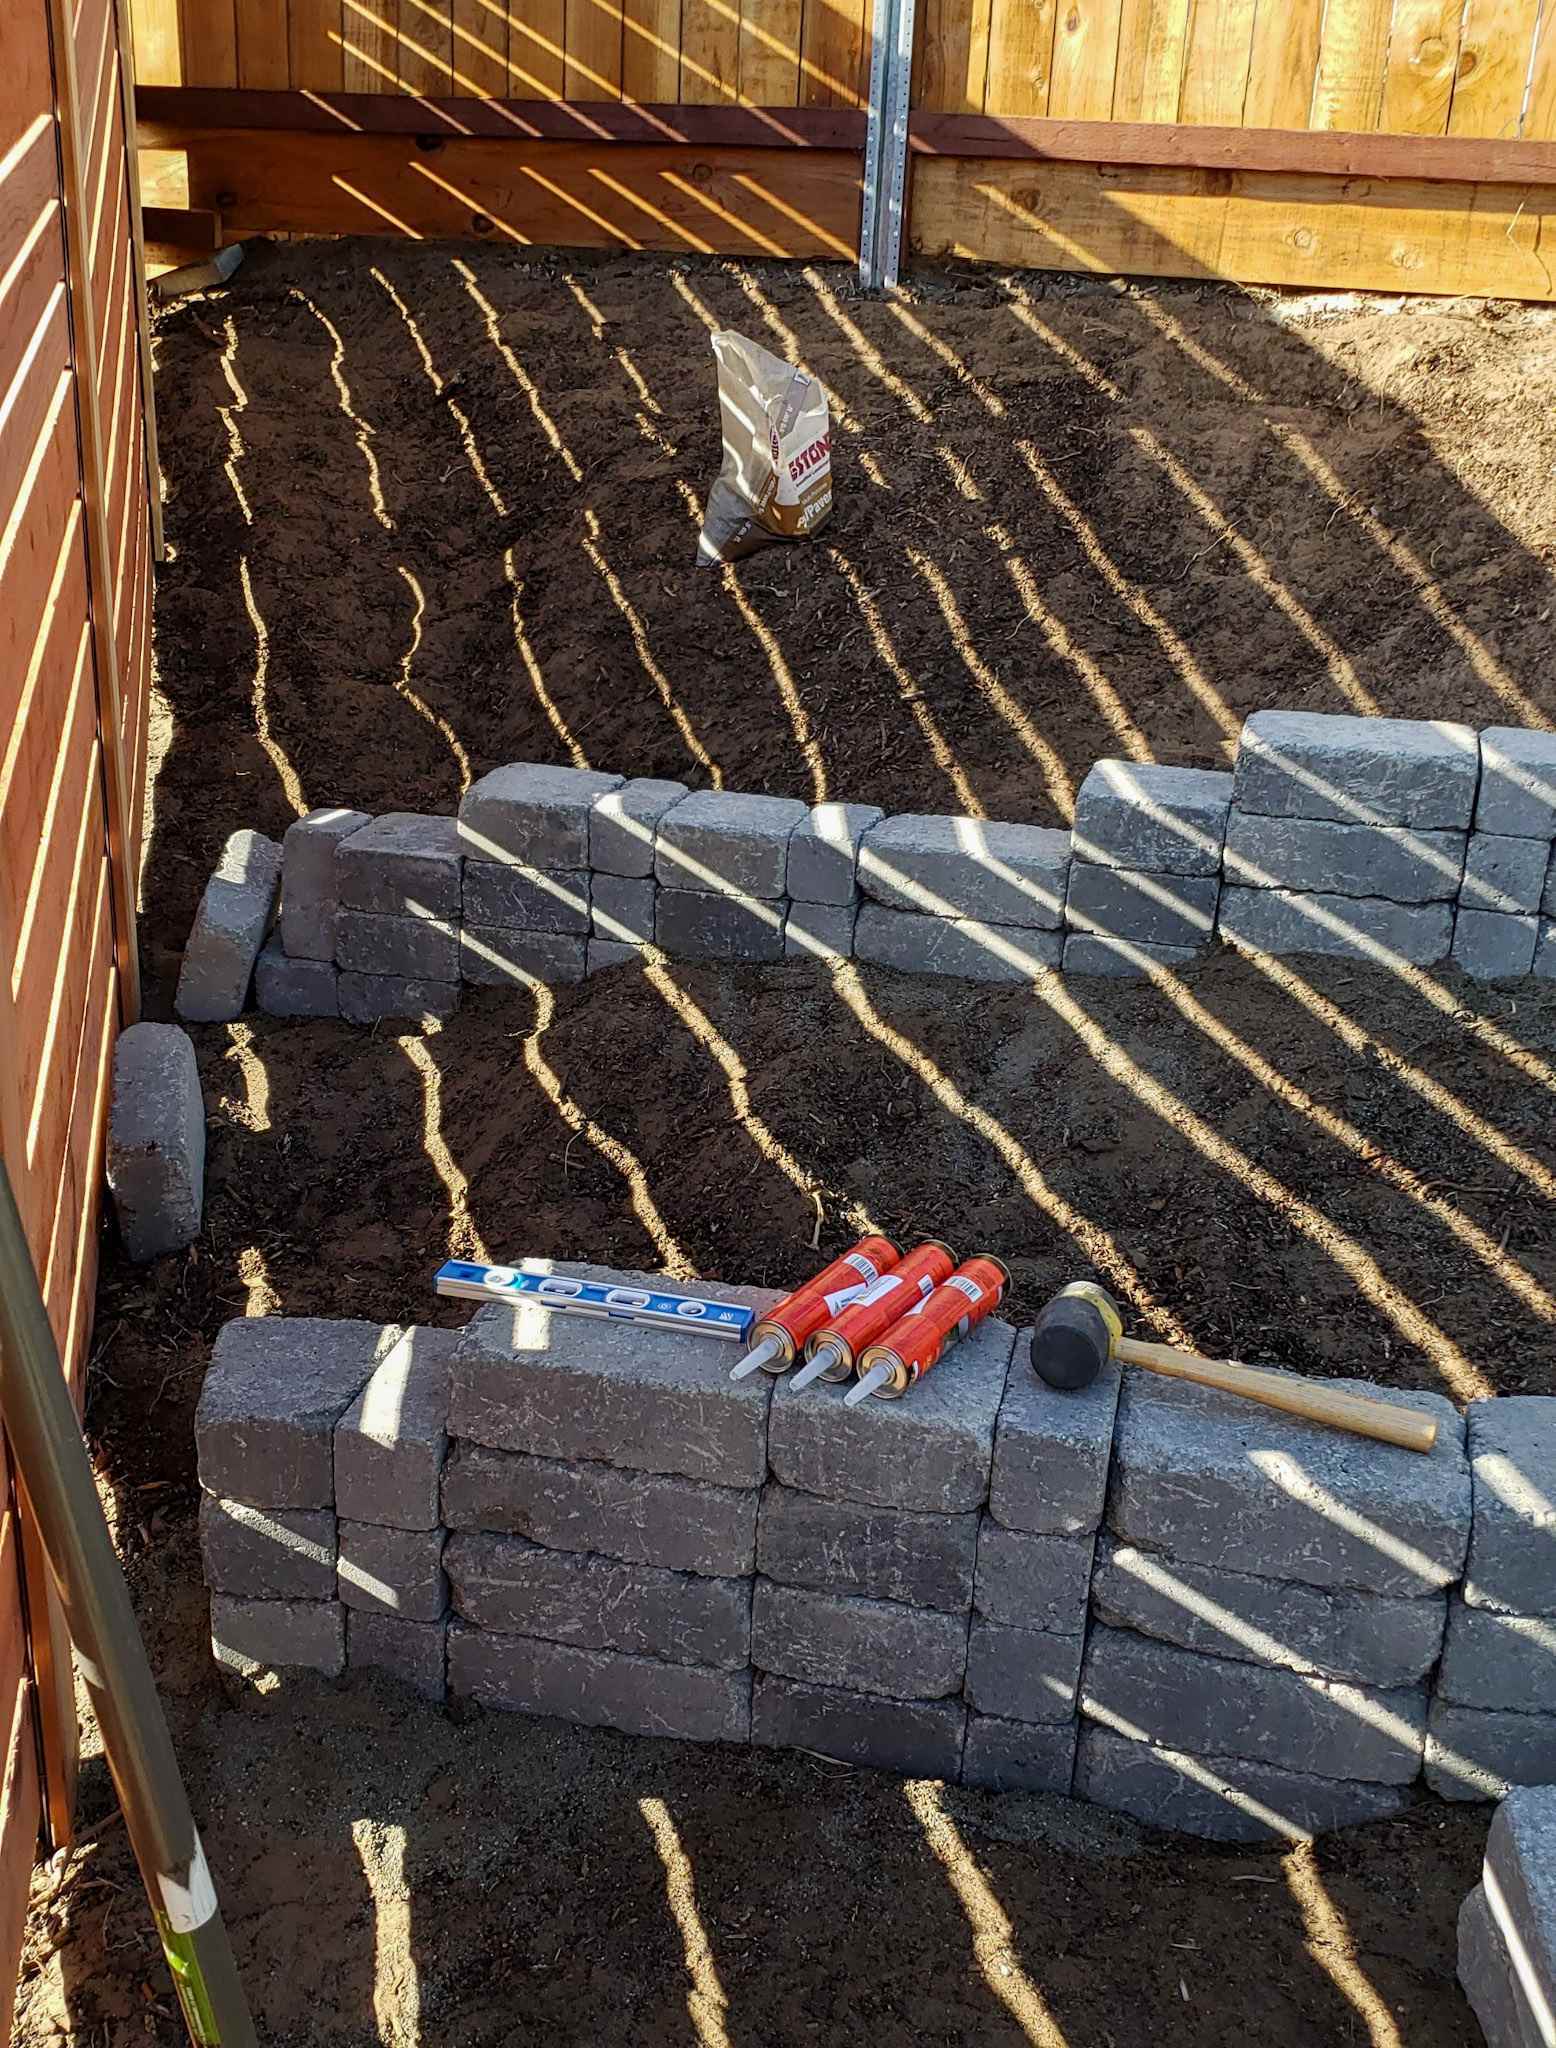 The process of building the stone terrace is underway, dirt is pulled away from each wall of the terrace while the pavers are glued together with strong adhesive.. The tubes of adhesive, a level, and a rubber mallet sit on the lowest formed stone terrace wall. 